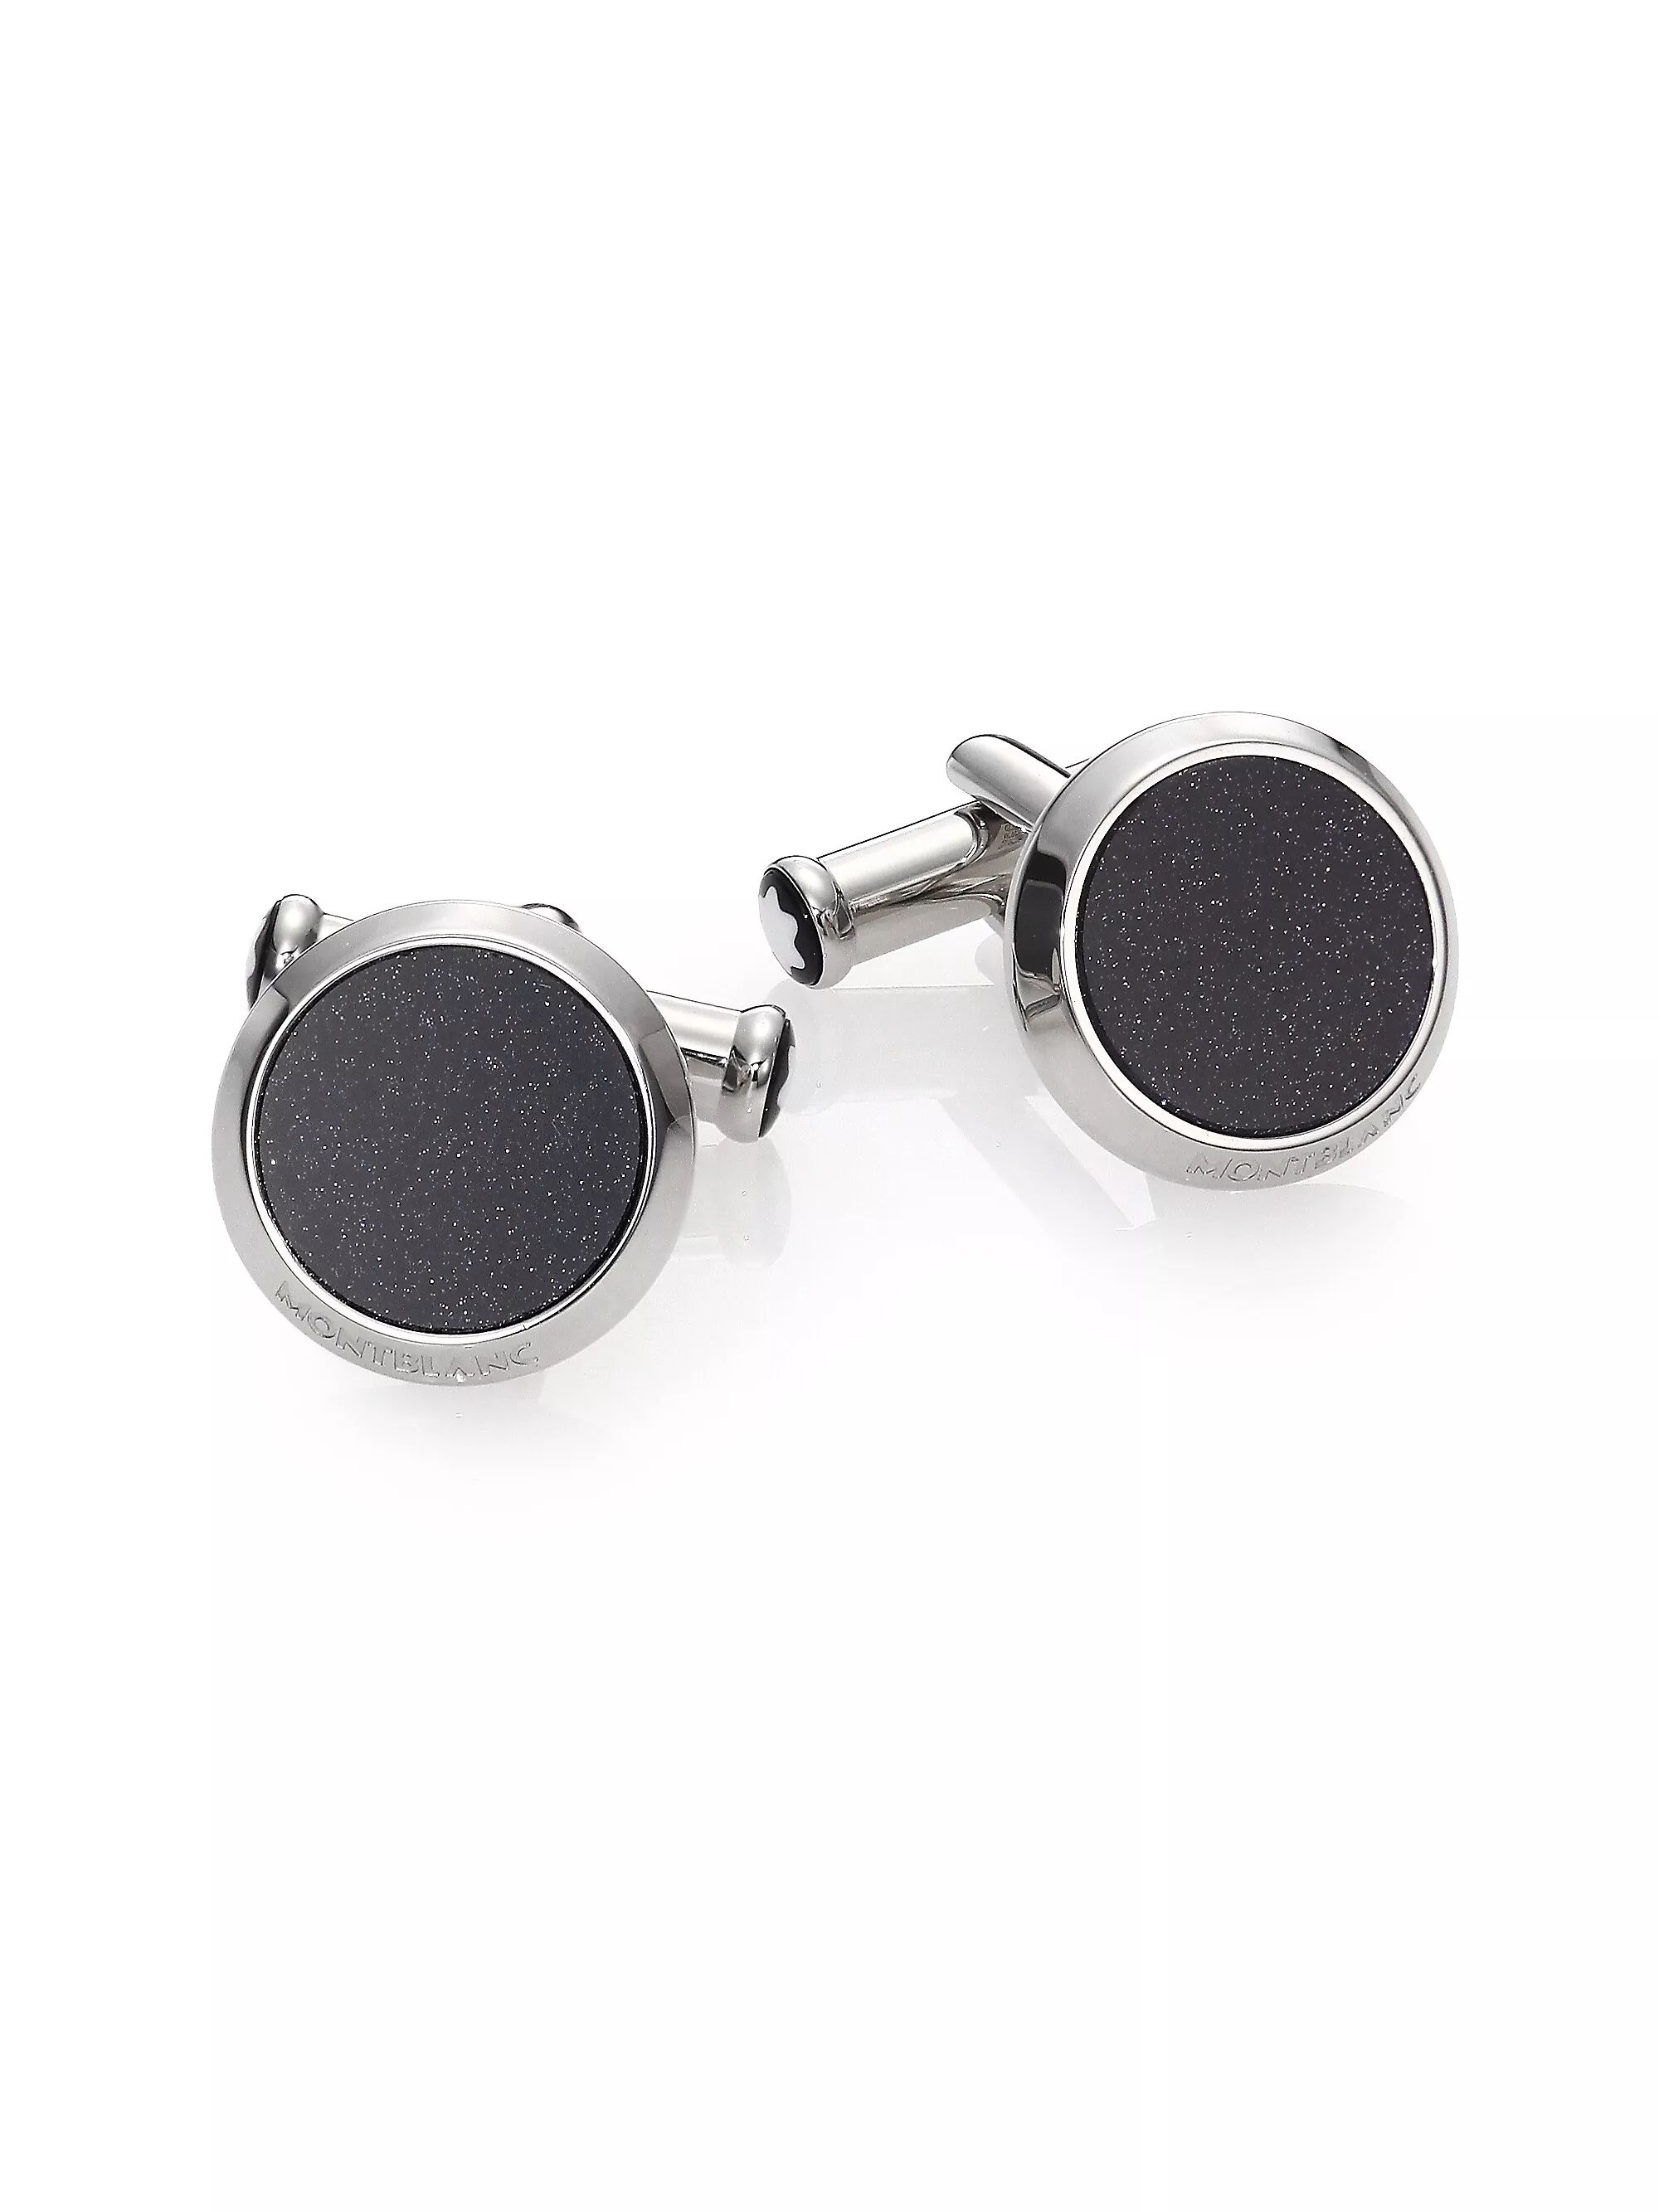 Goldstone & Stainless Steel Cuff Links | Saks Fifth Avenue